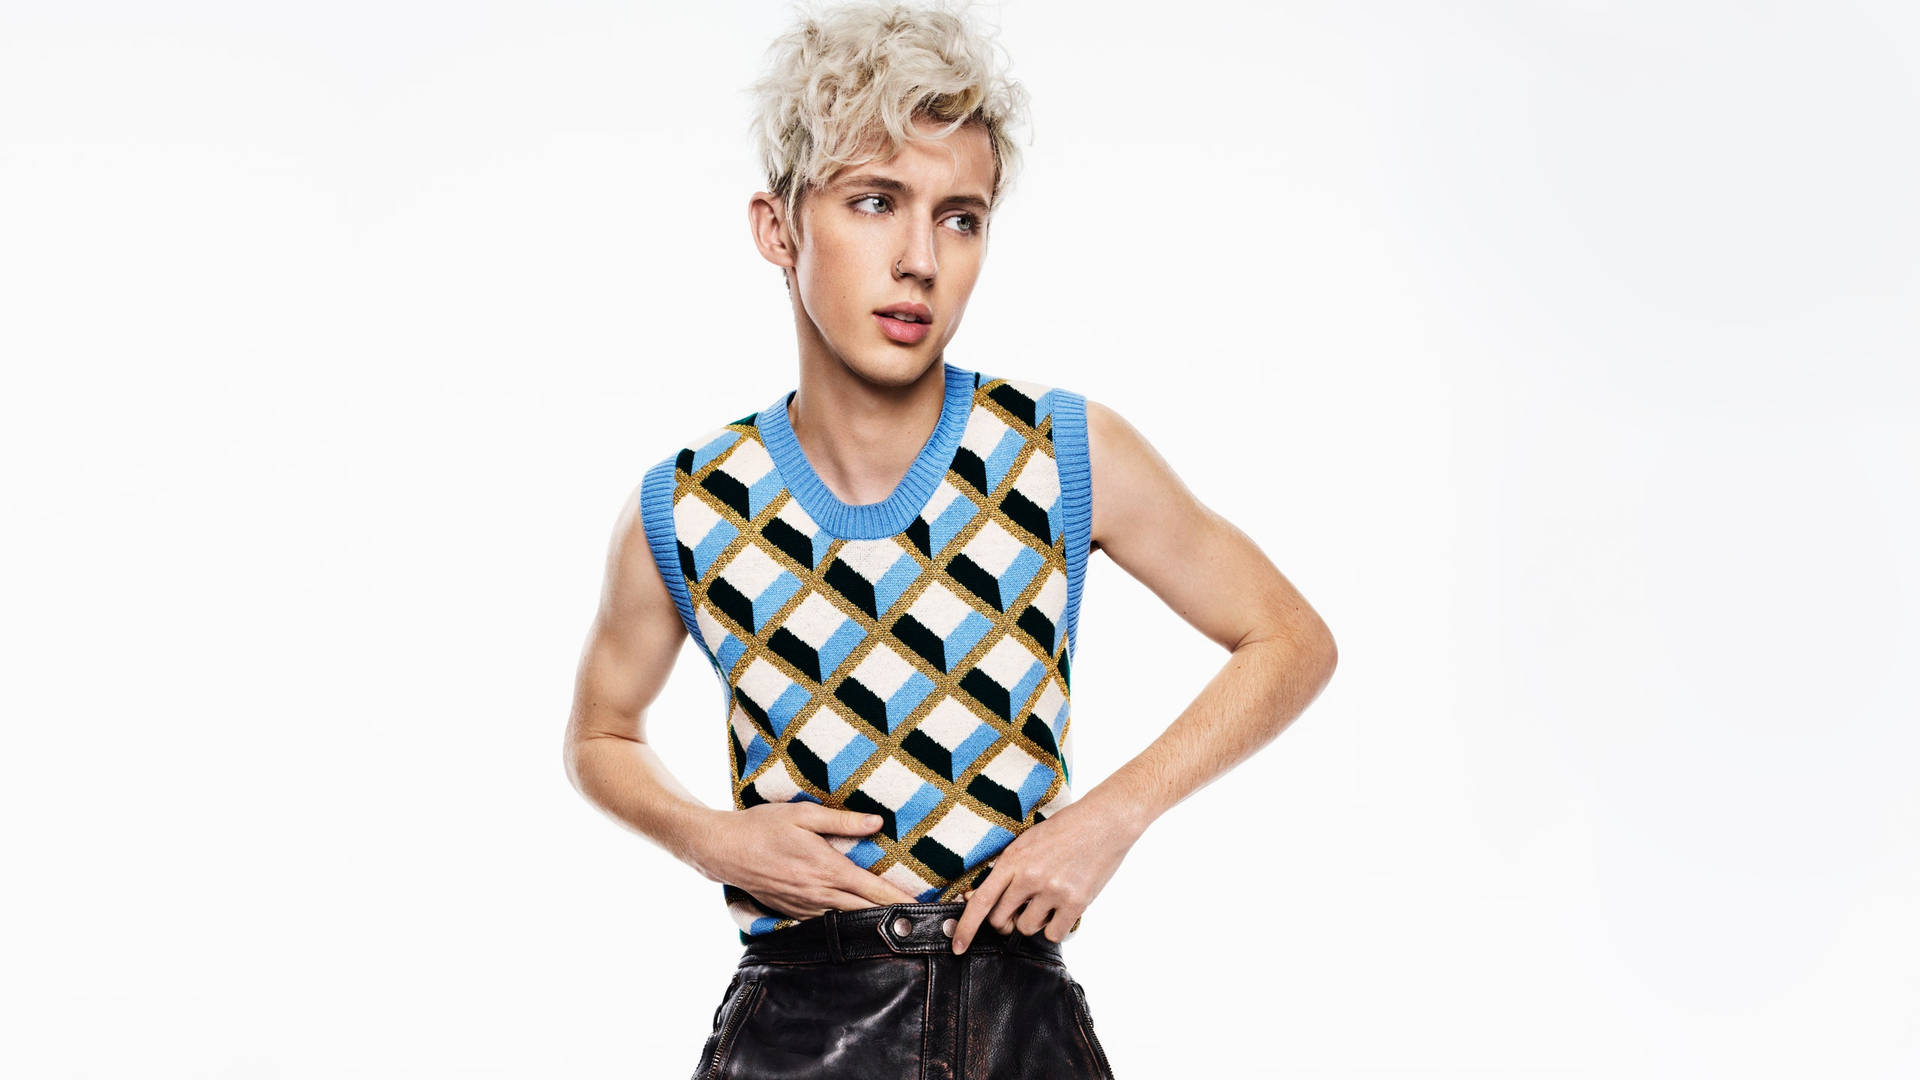 Troye Sivan Sporting A Stylish Blue Retro Outfit.